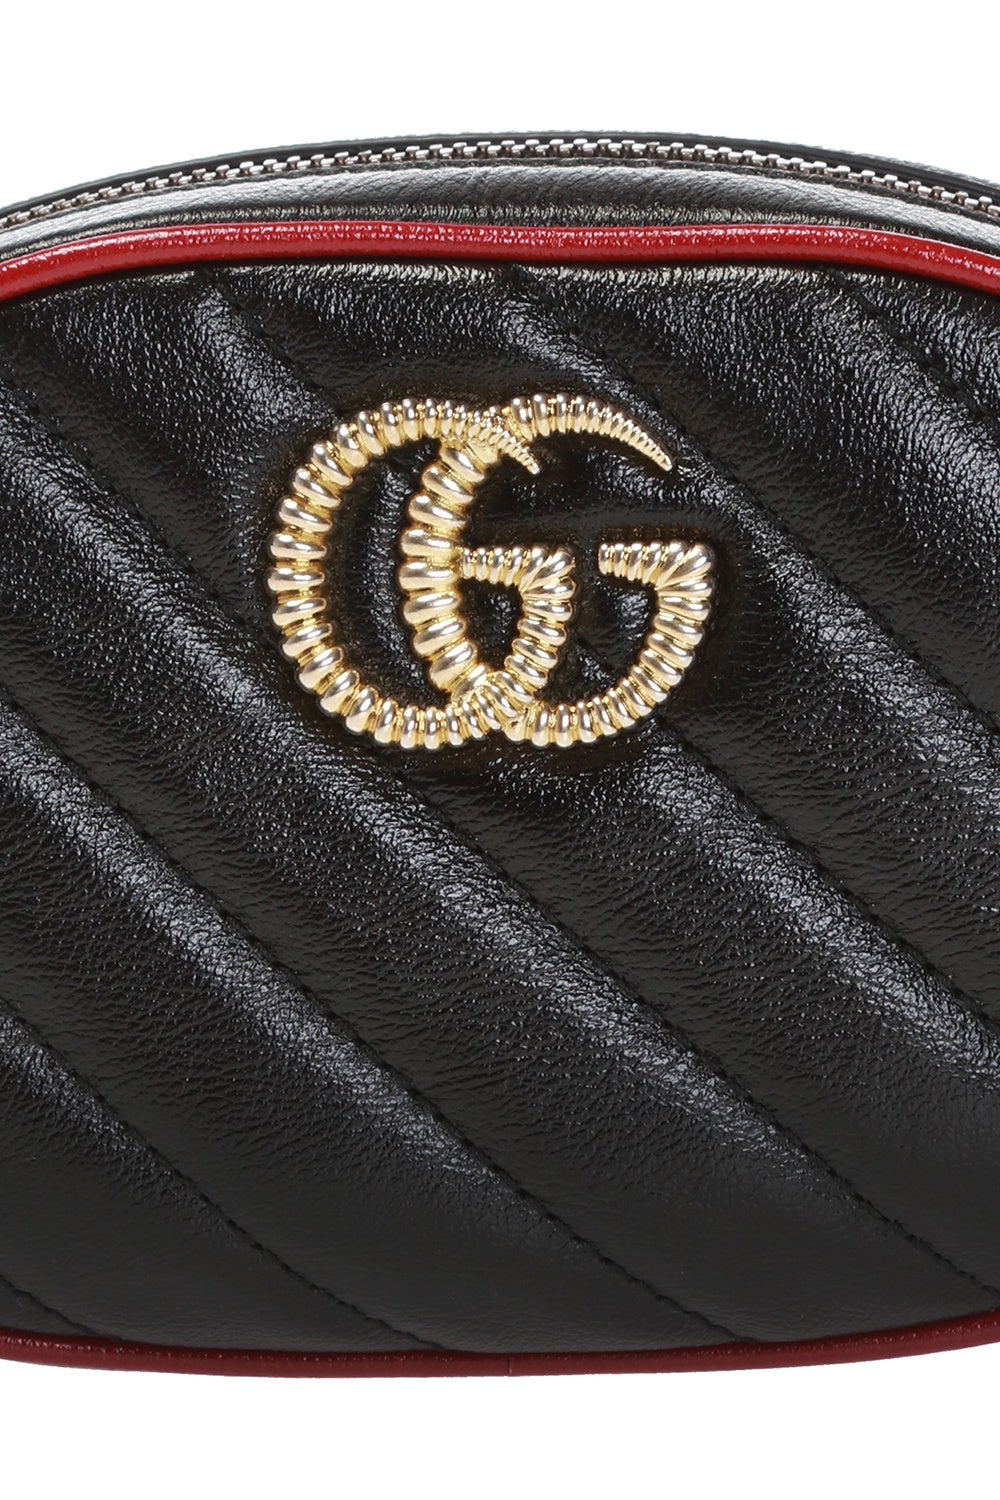 Gucci GG Marmont Zip Around Shoulder Bag Small Beige/Ebony in  Canvas/Leather with Gold-tone - US